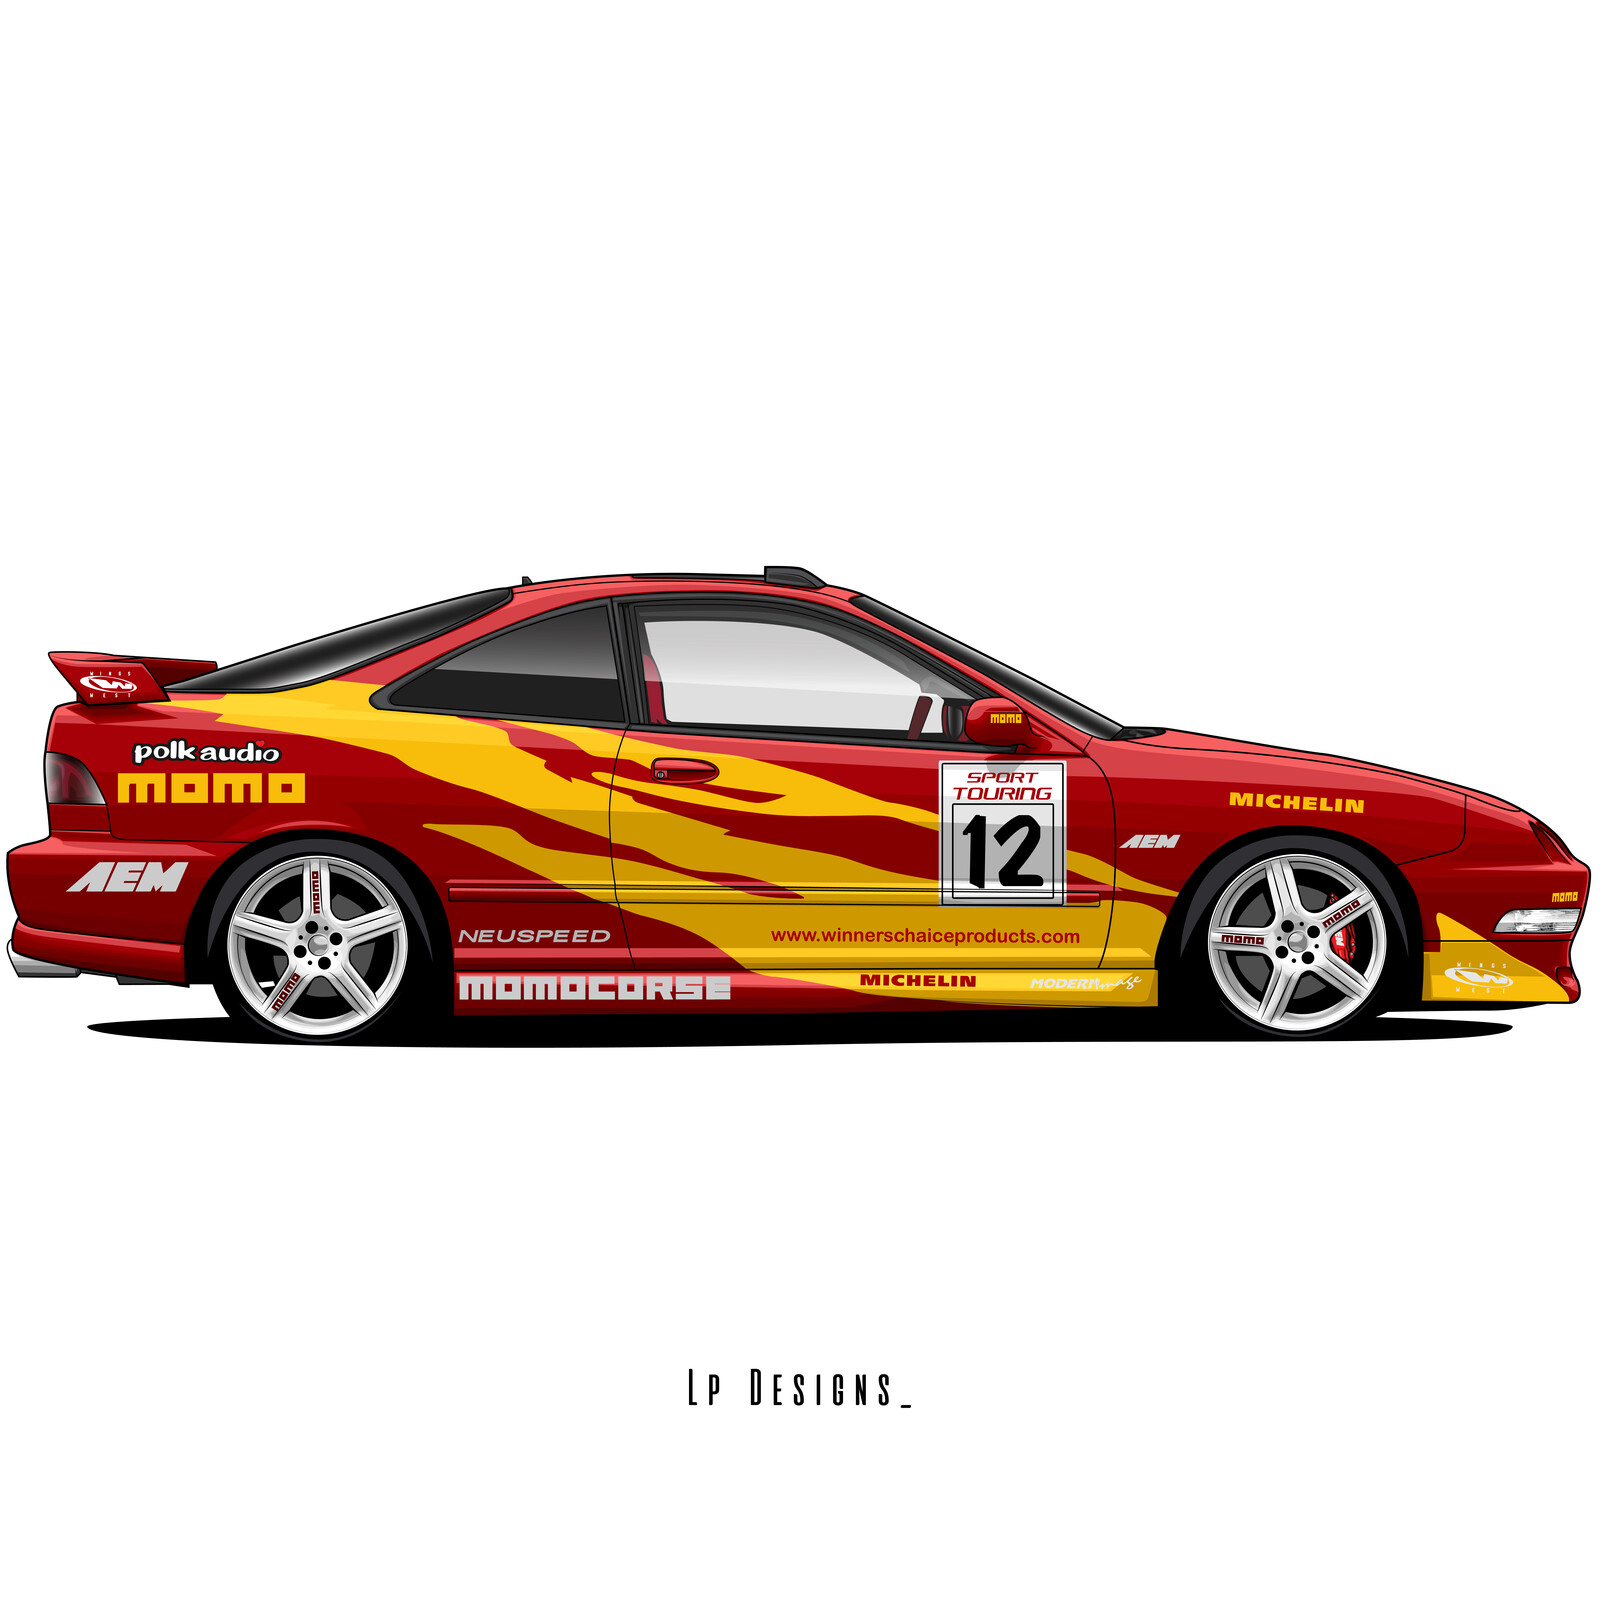 Lp Designs_ - Acura Integra Dc2 - The Fast And Furious